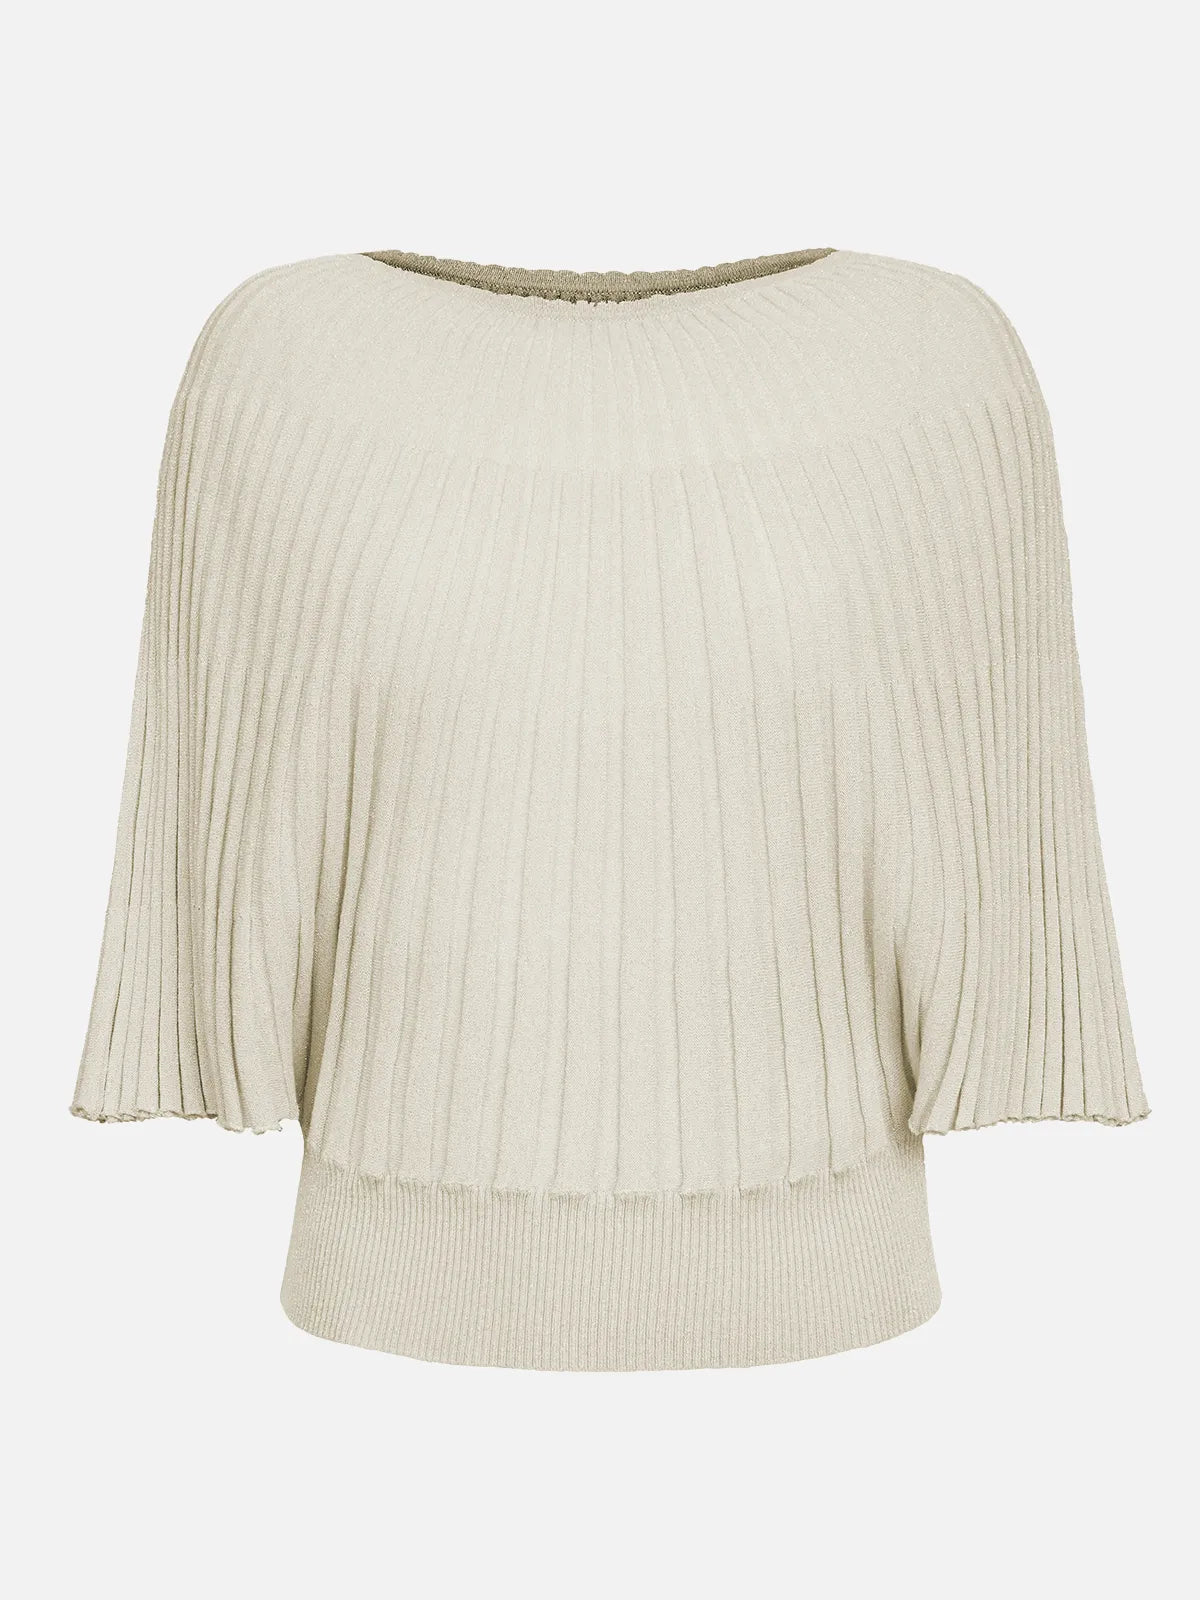 Comfortable and loose-fitting autumn knitwear: A fashionable choice for casual chic.